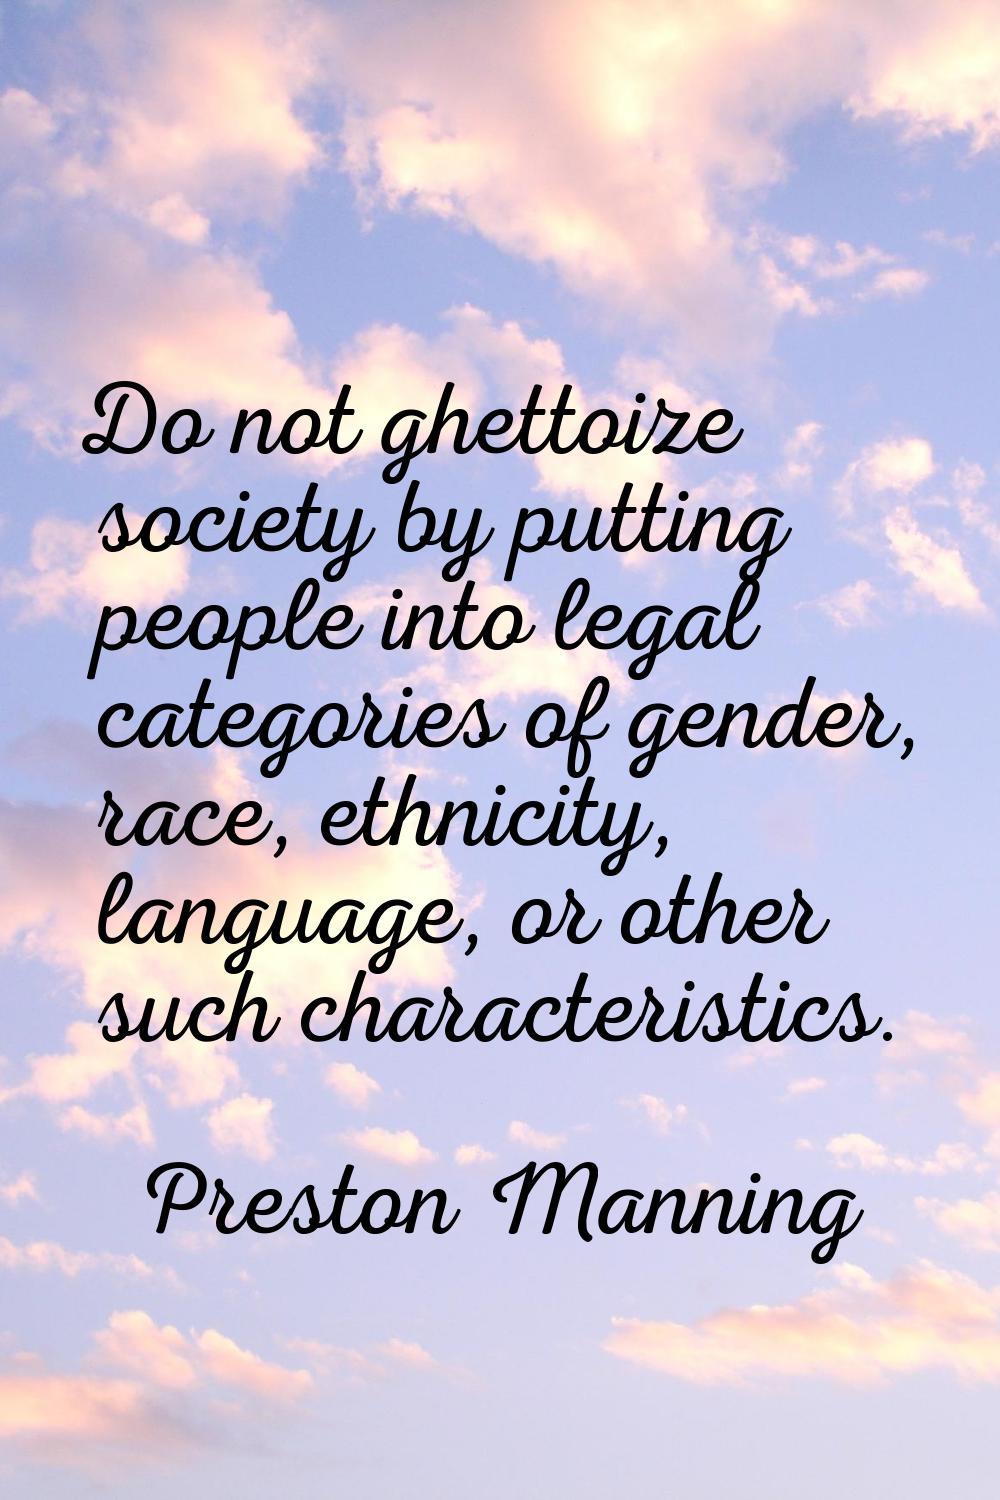 Do not ghettoize society by putting people into legal categories of gender, race, ethnicity, langua